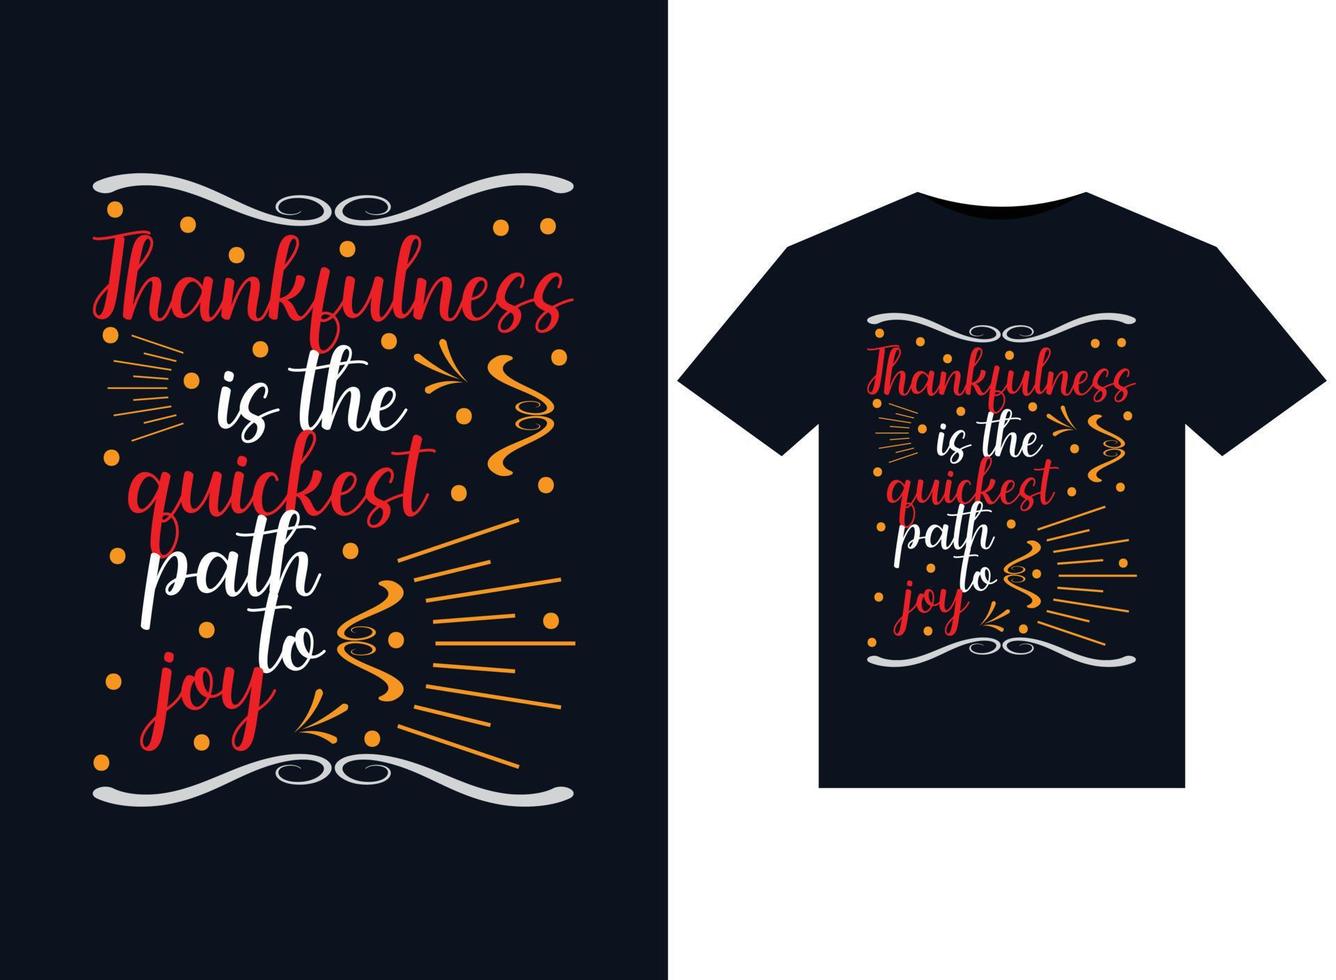 Thankfulness is the quickest path to joy illustrations for print-ready T-Shirts design vector